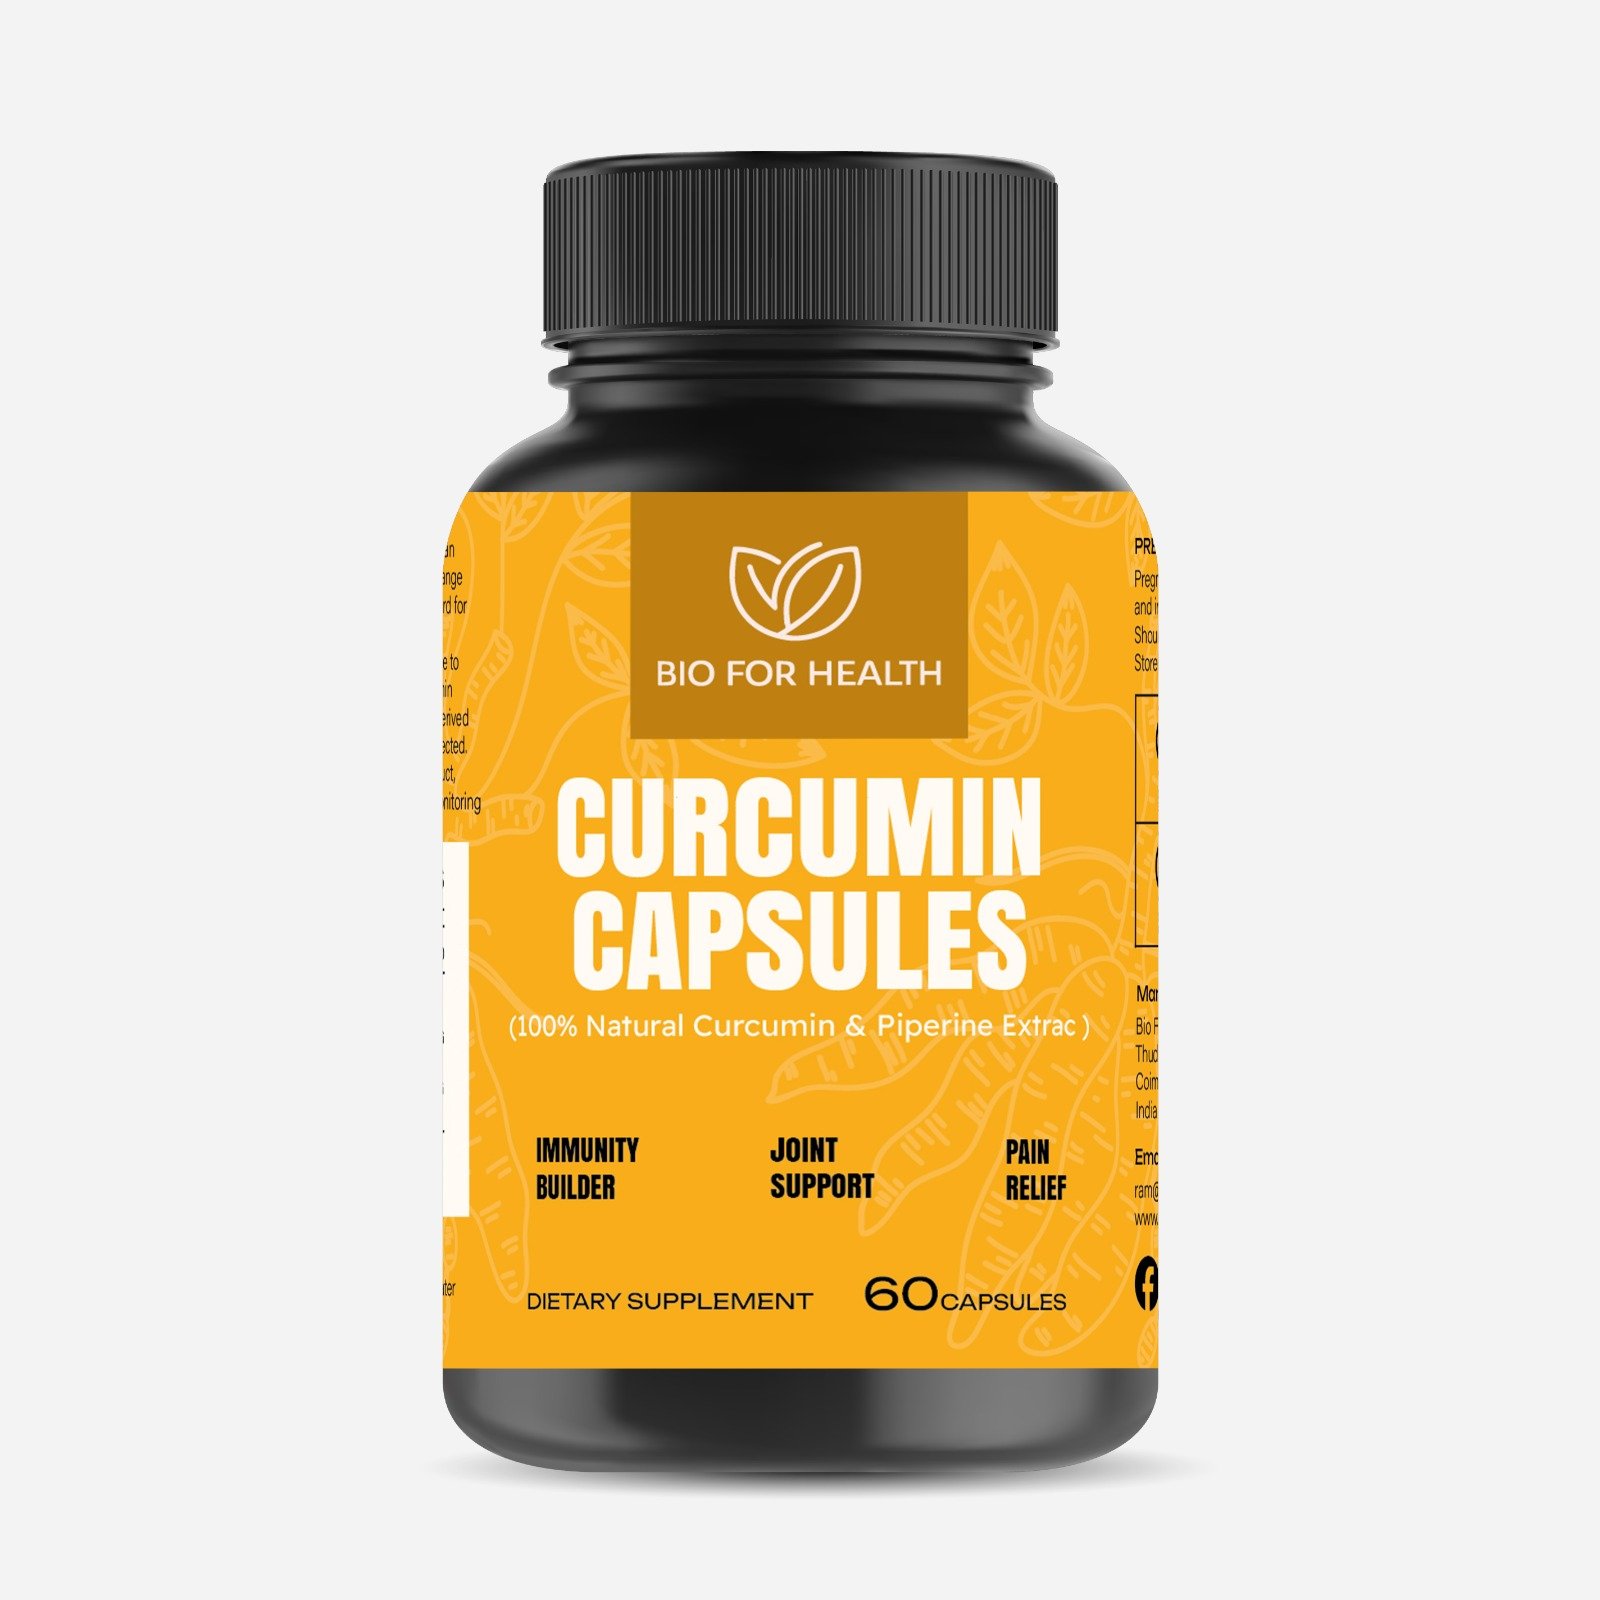 Curcumin with Piperine Extract Capsules